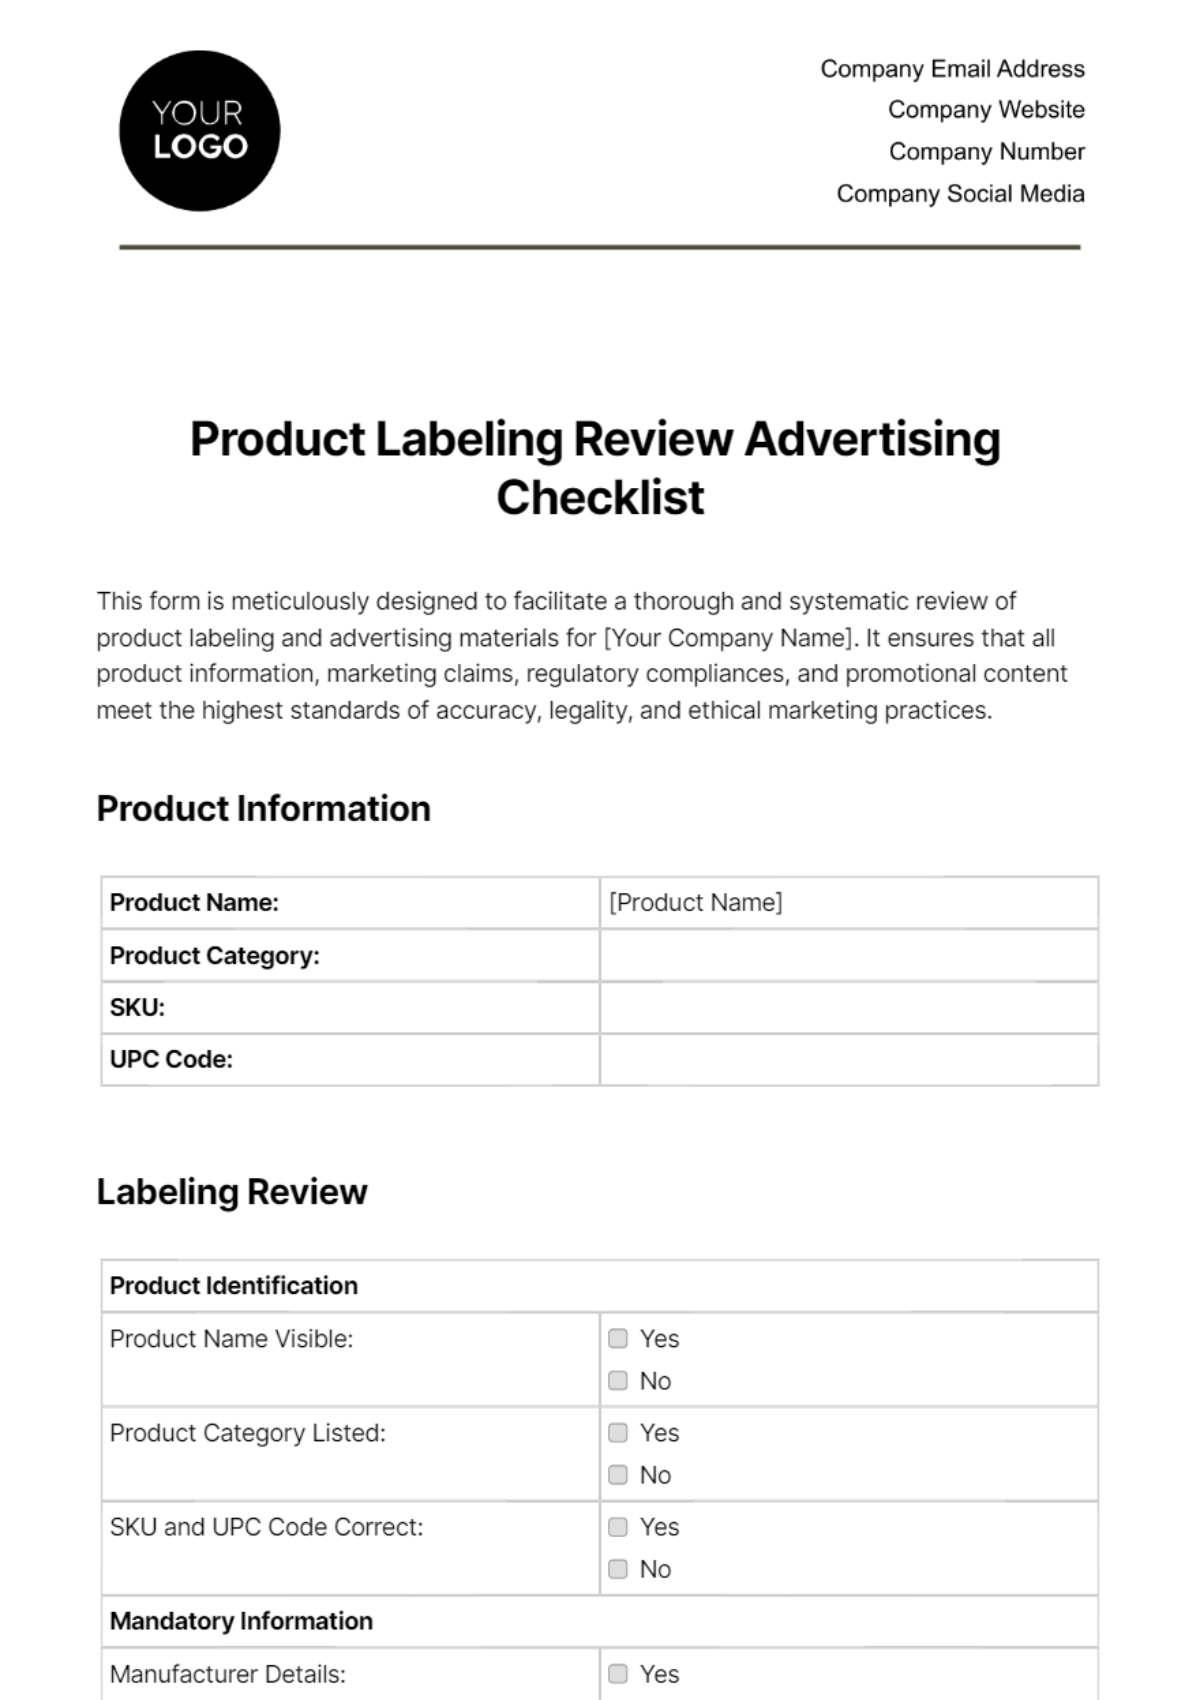 Free Product Labeling Review Advertising Checklist Template